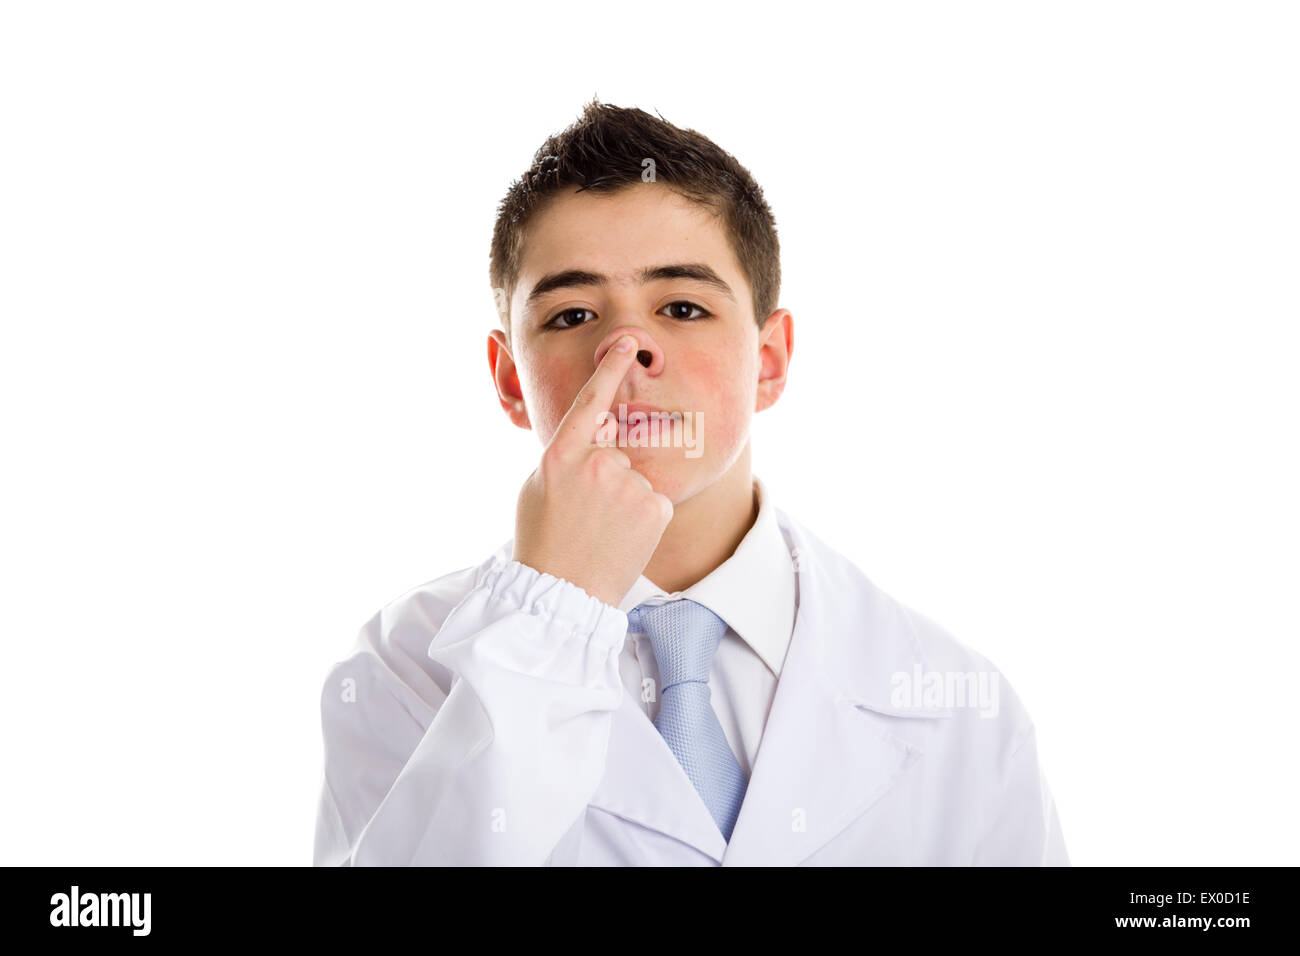 child dressed as a doctor in light blue tie and white coat helps to feel medicine more friendly: he is touching and pushing up his nose. His acne skin has not ben retouched Stock Photo